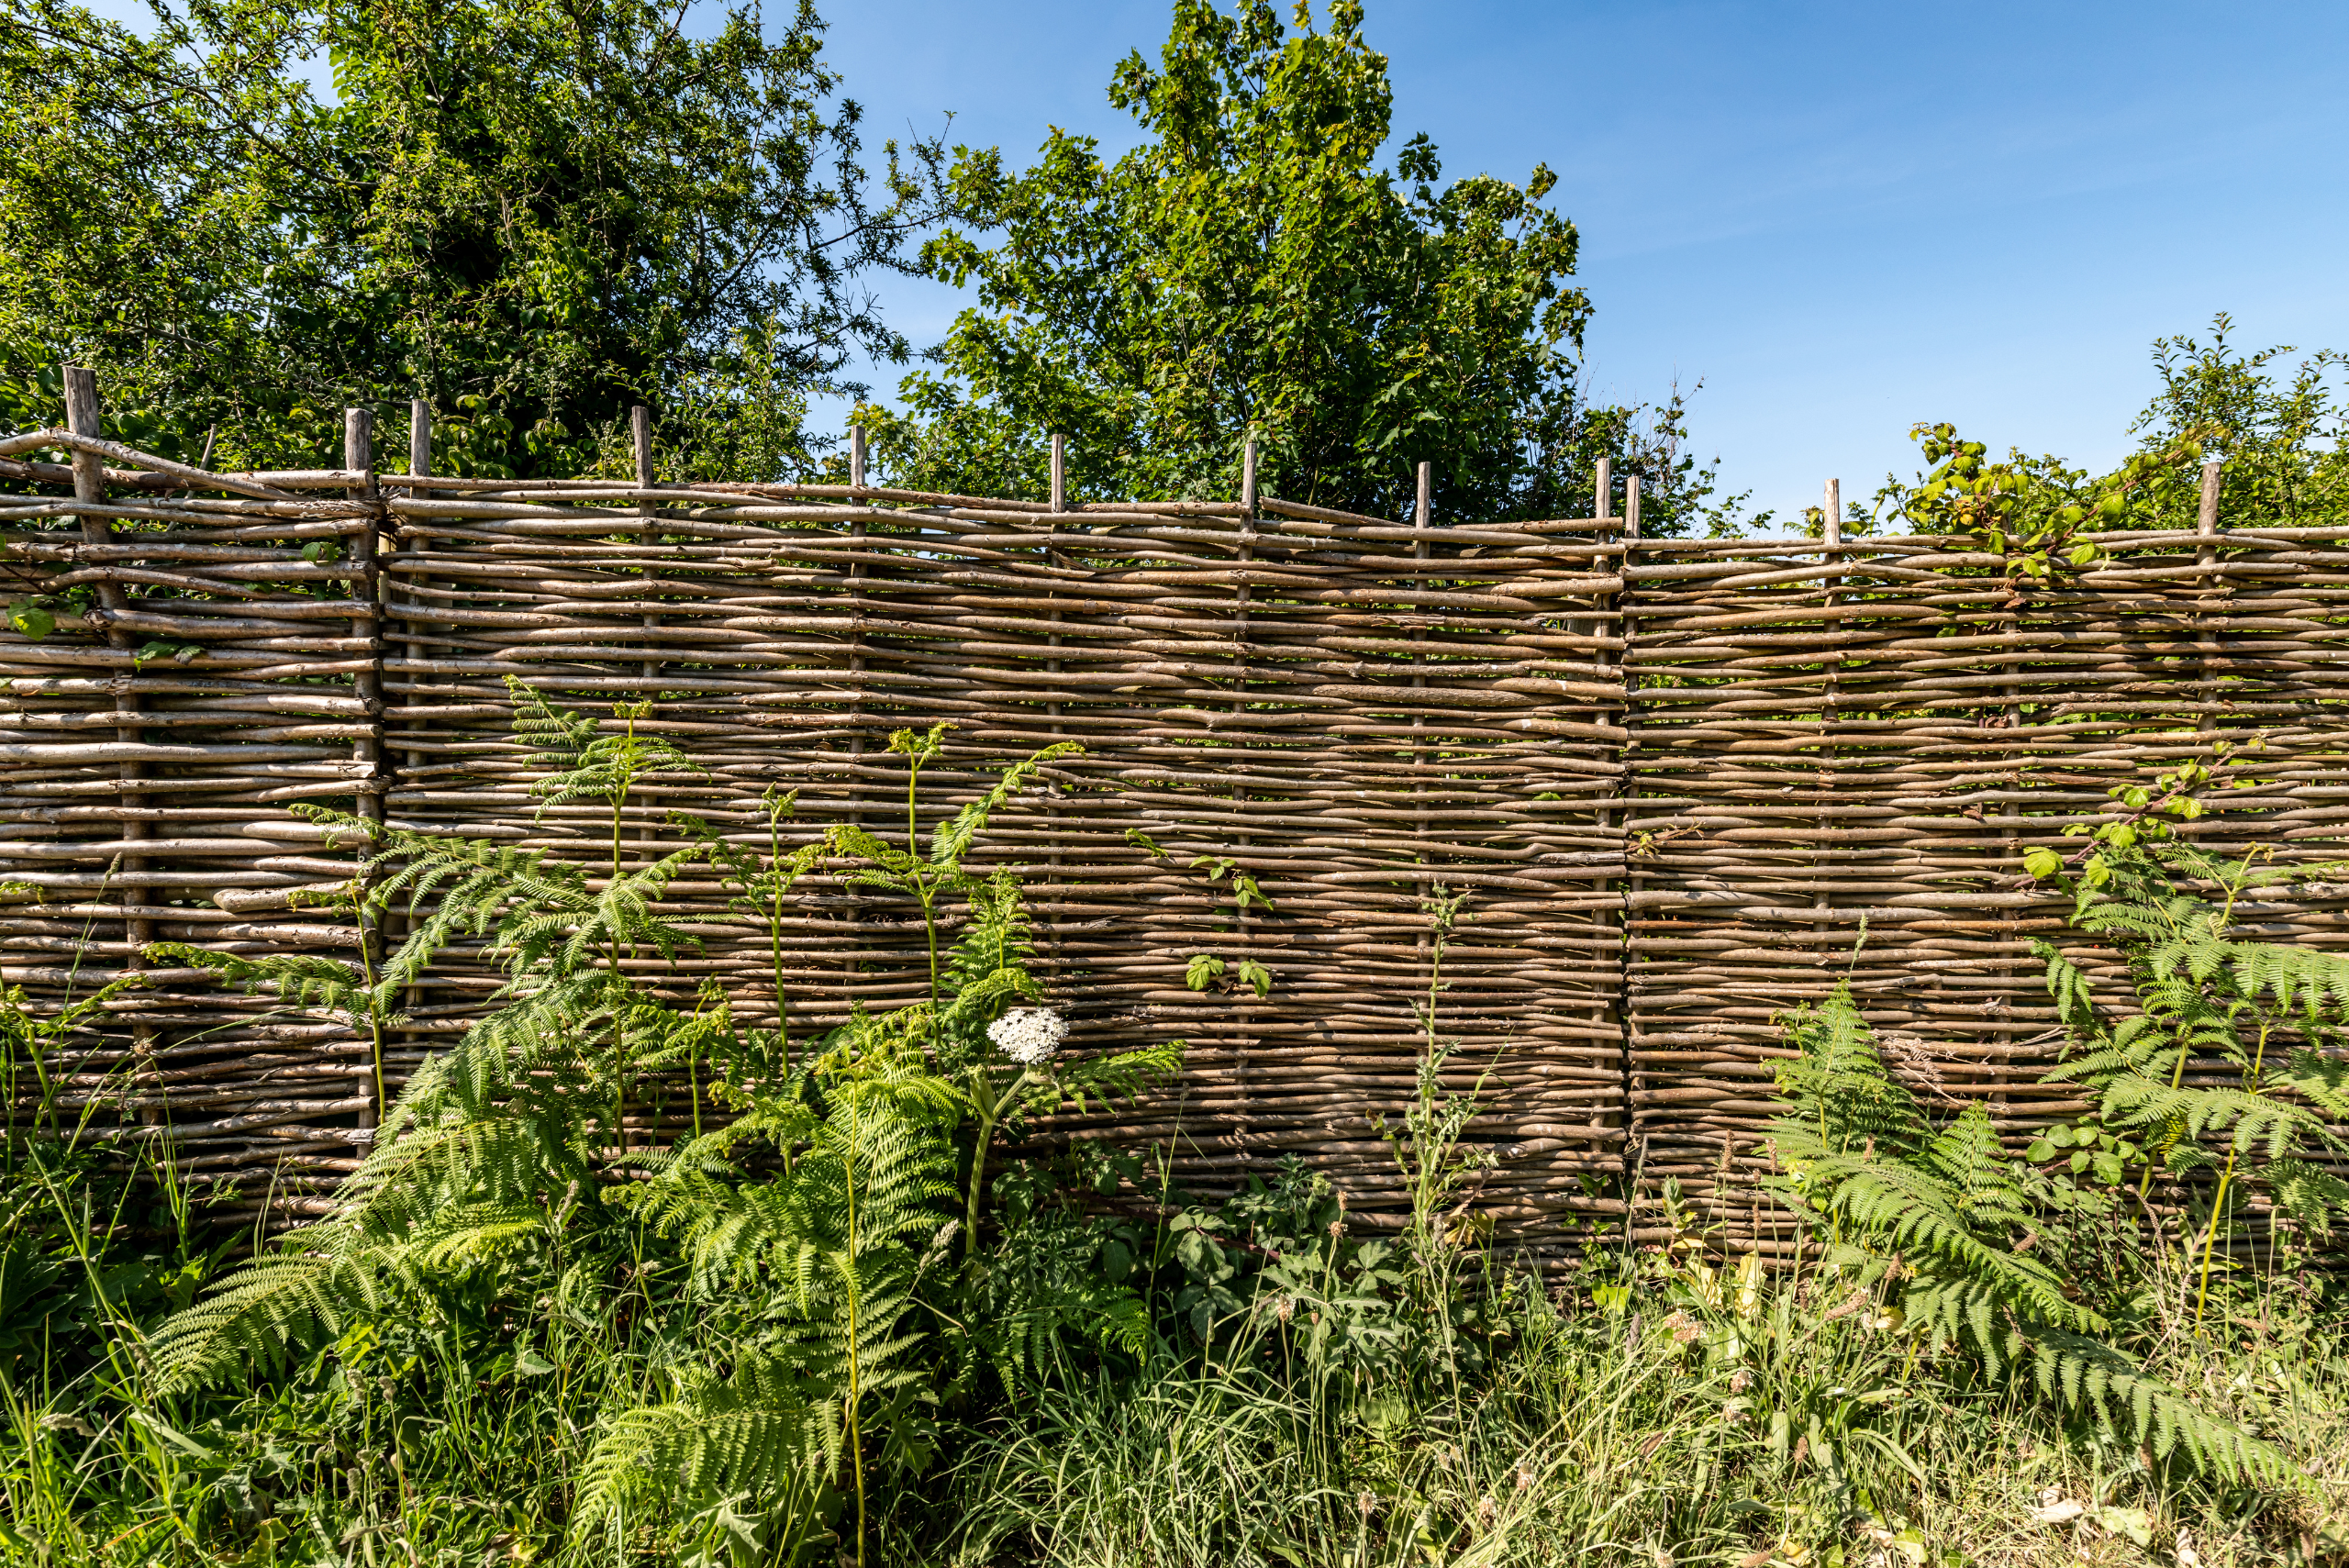 Woven willow fence with plants surrounding it.